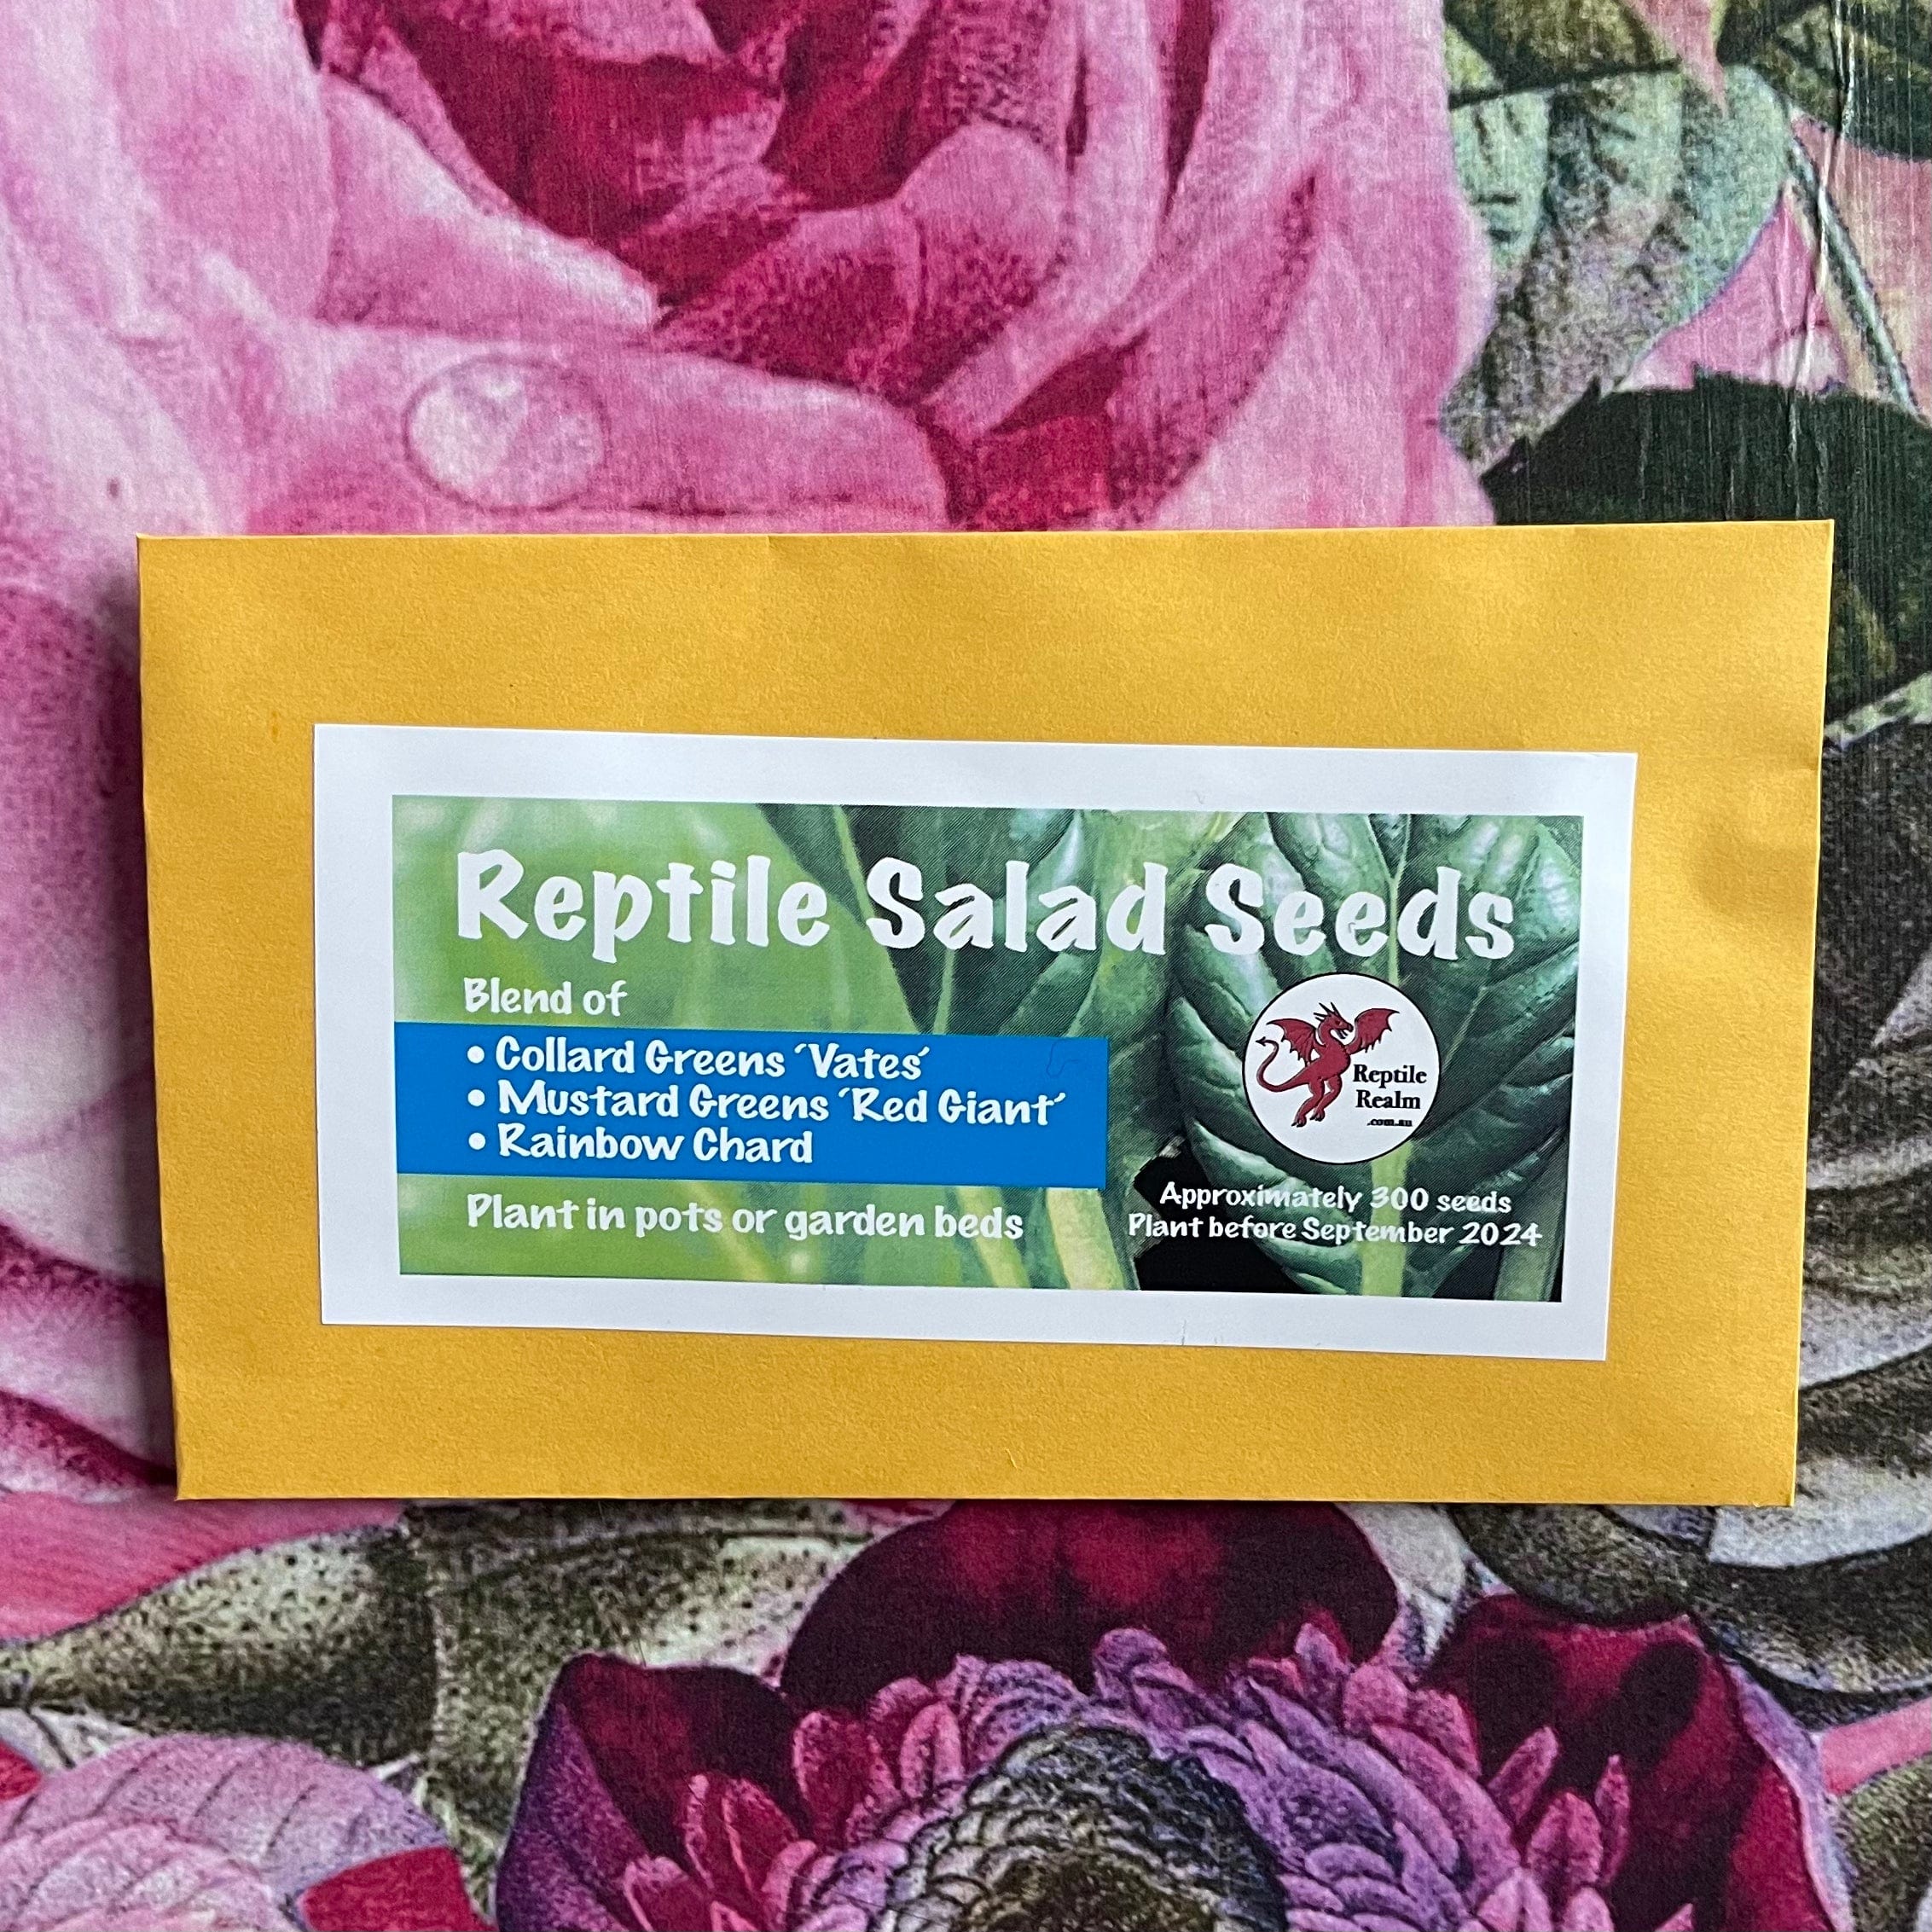 Reptile Realm Seed Blend Reptile Salad Seeds (Blue Label) - Collard Greens, Mustard Greens and Rainbow Chard